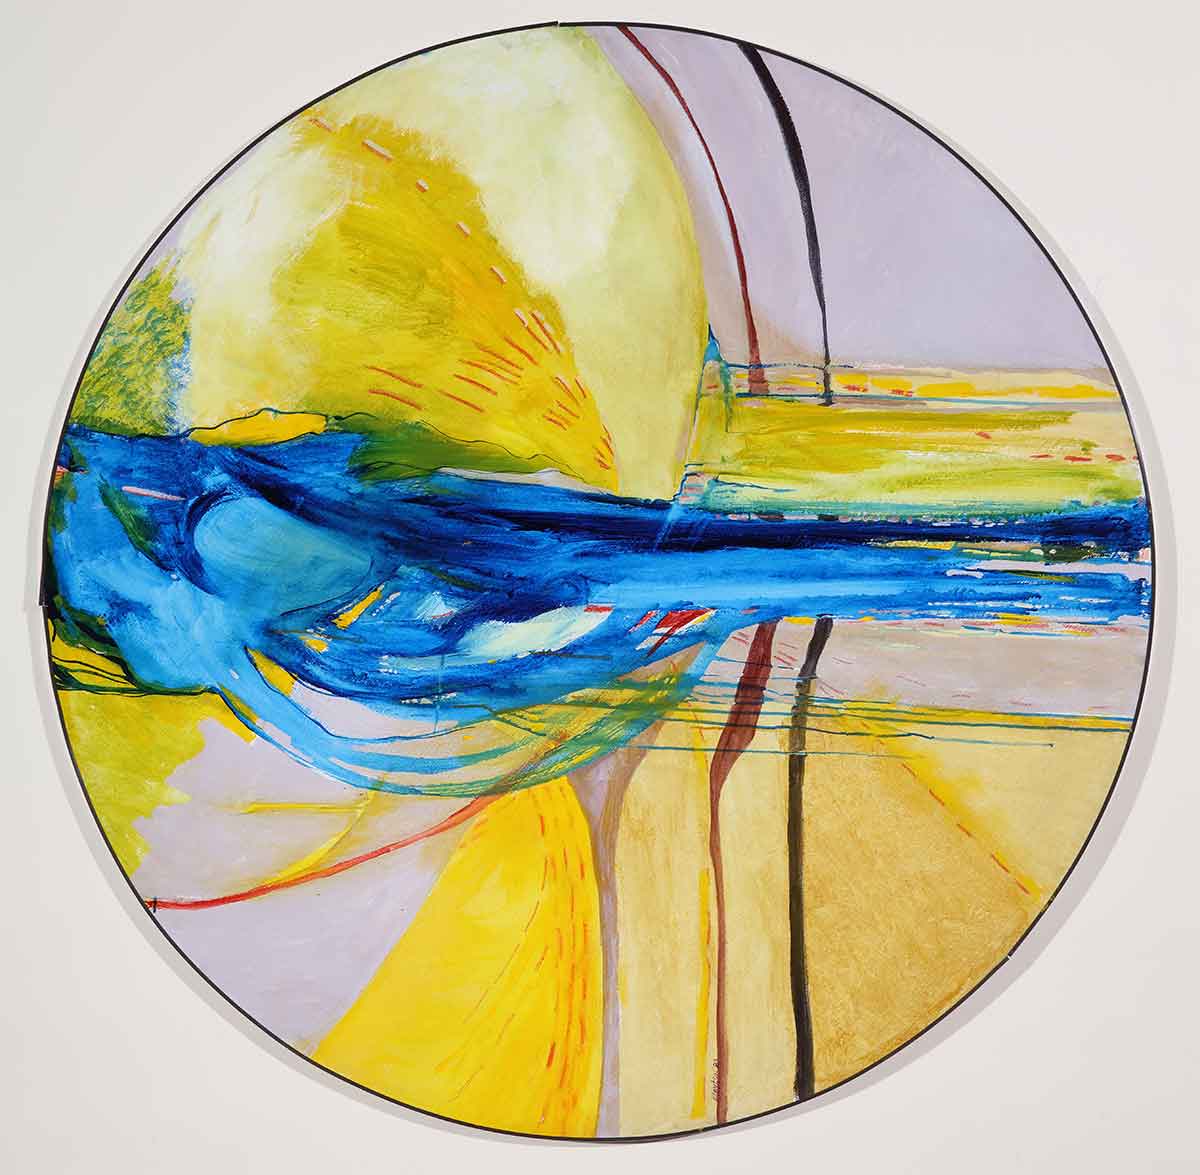 A circular canvas with a bright yellow and blue abstract painting on it